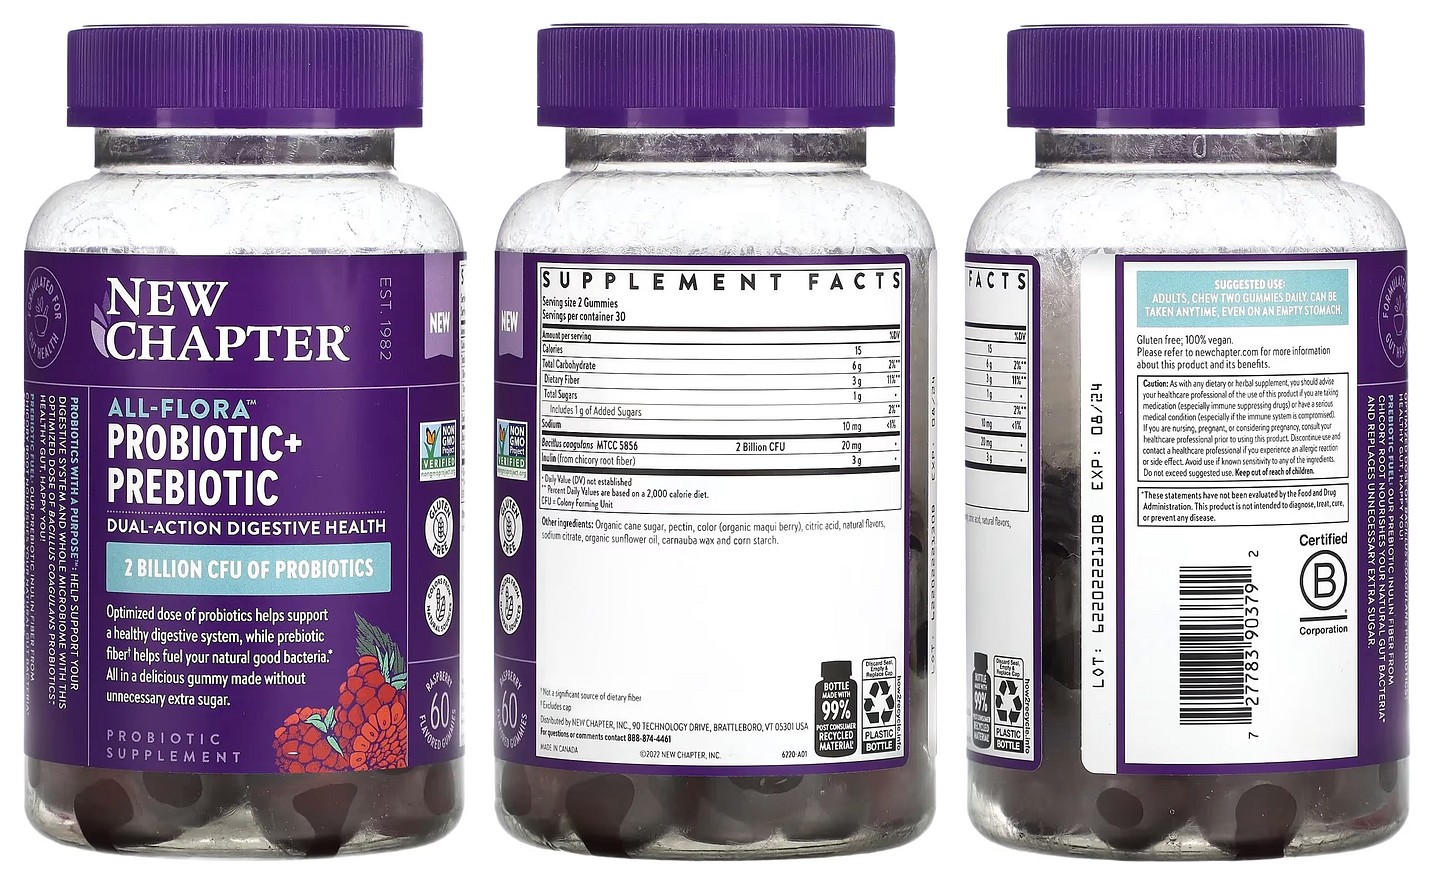 New Chapter, All-Flora Probiotic + Prebiotic packaging